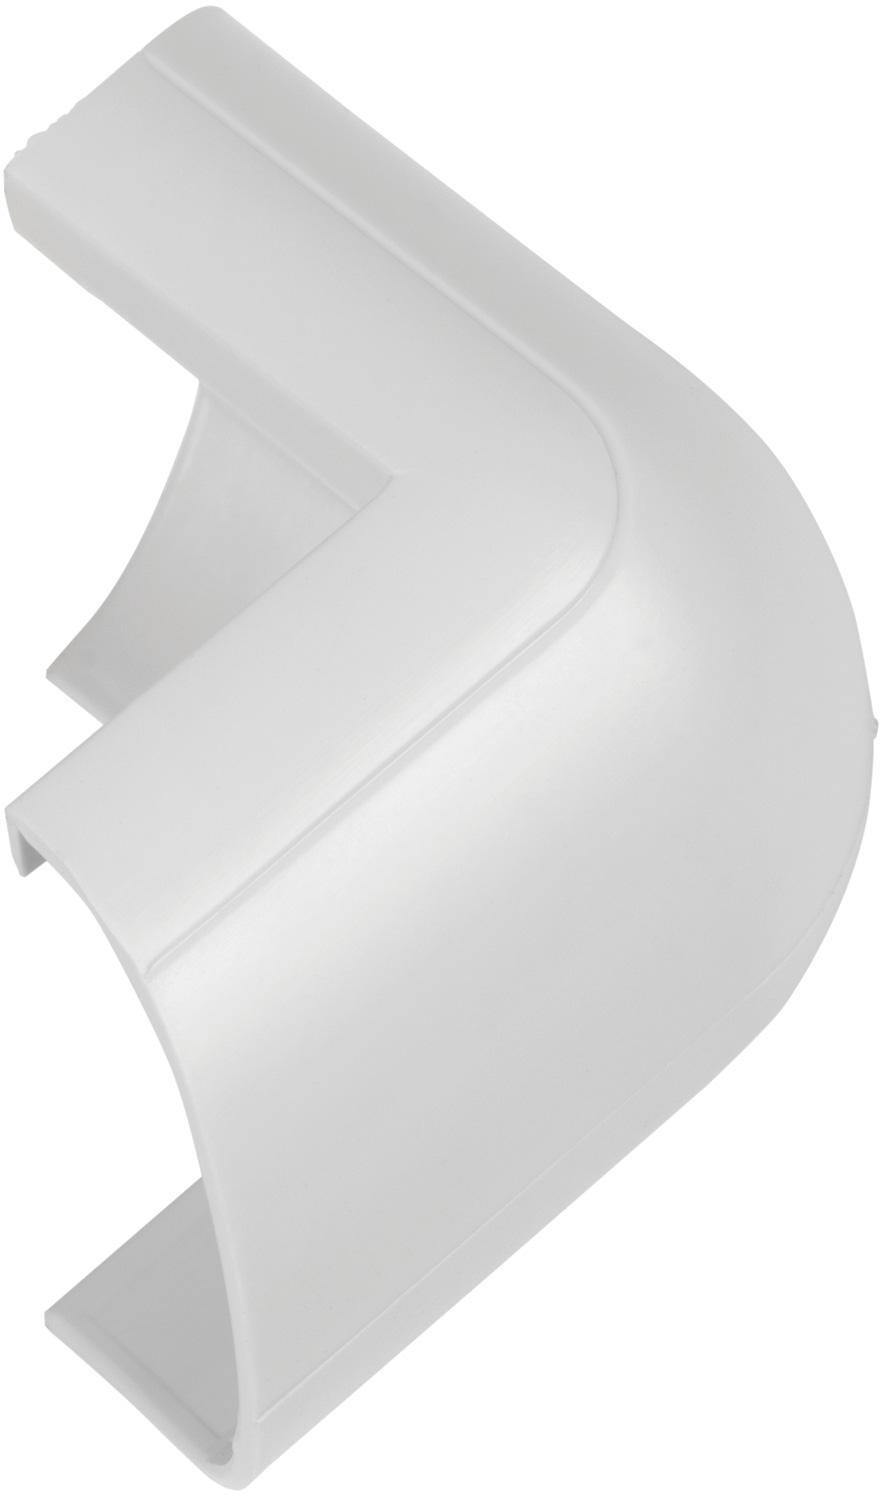 Clip-over trunking accessories 30x15 Clip-Over white External Bend 30x15mm Bag of 5